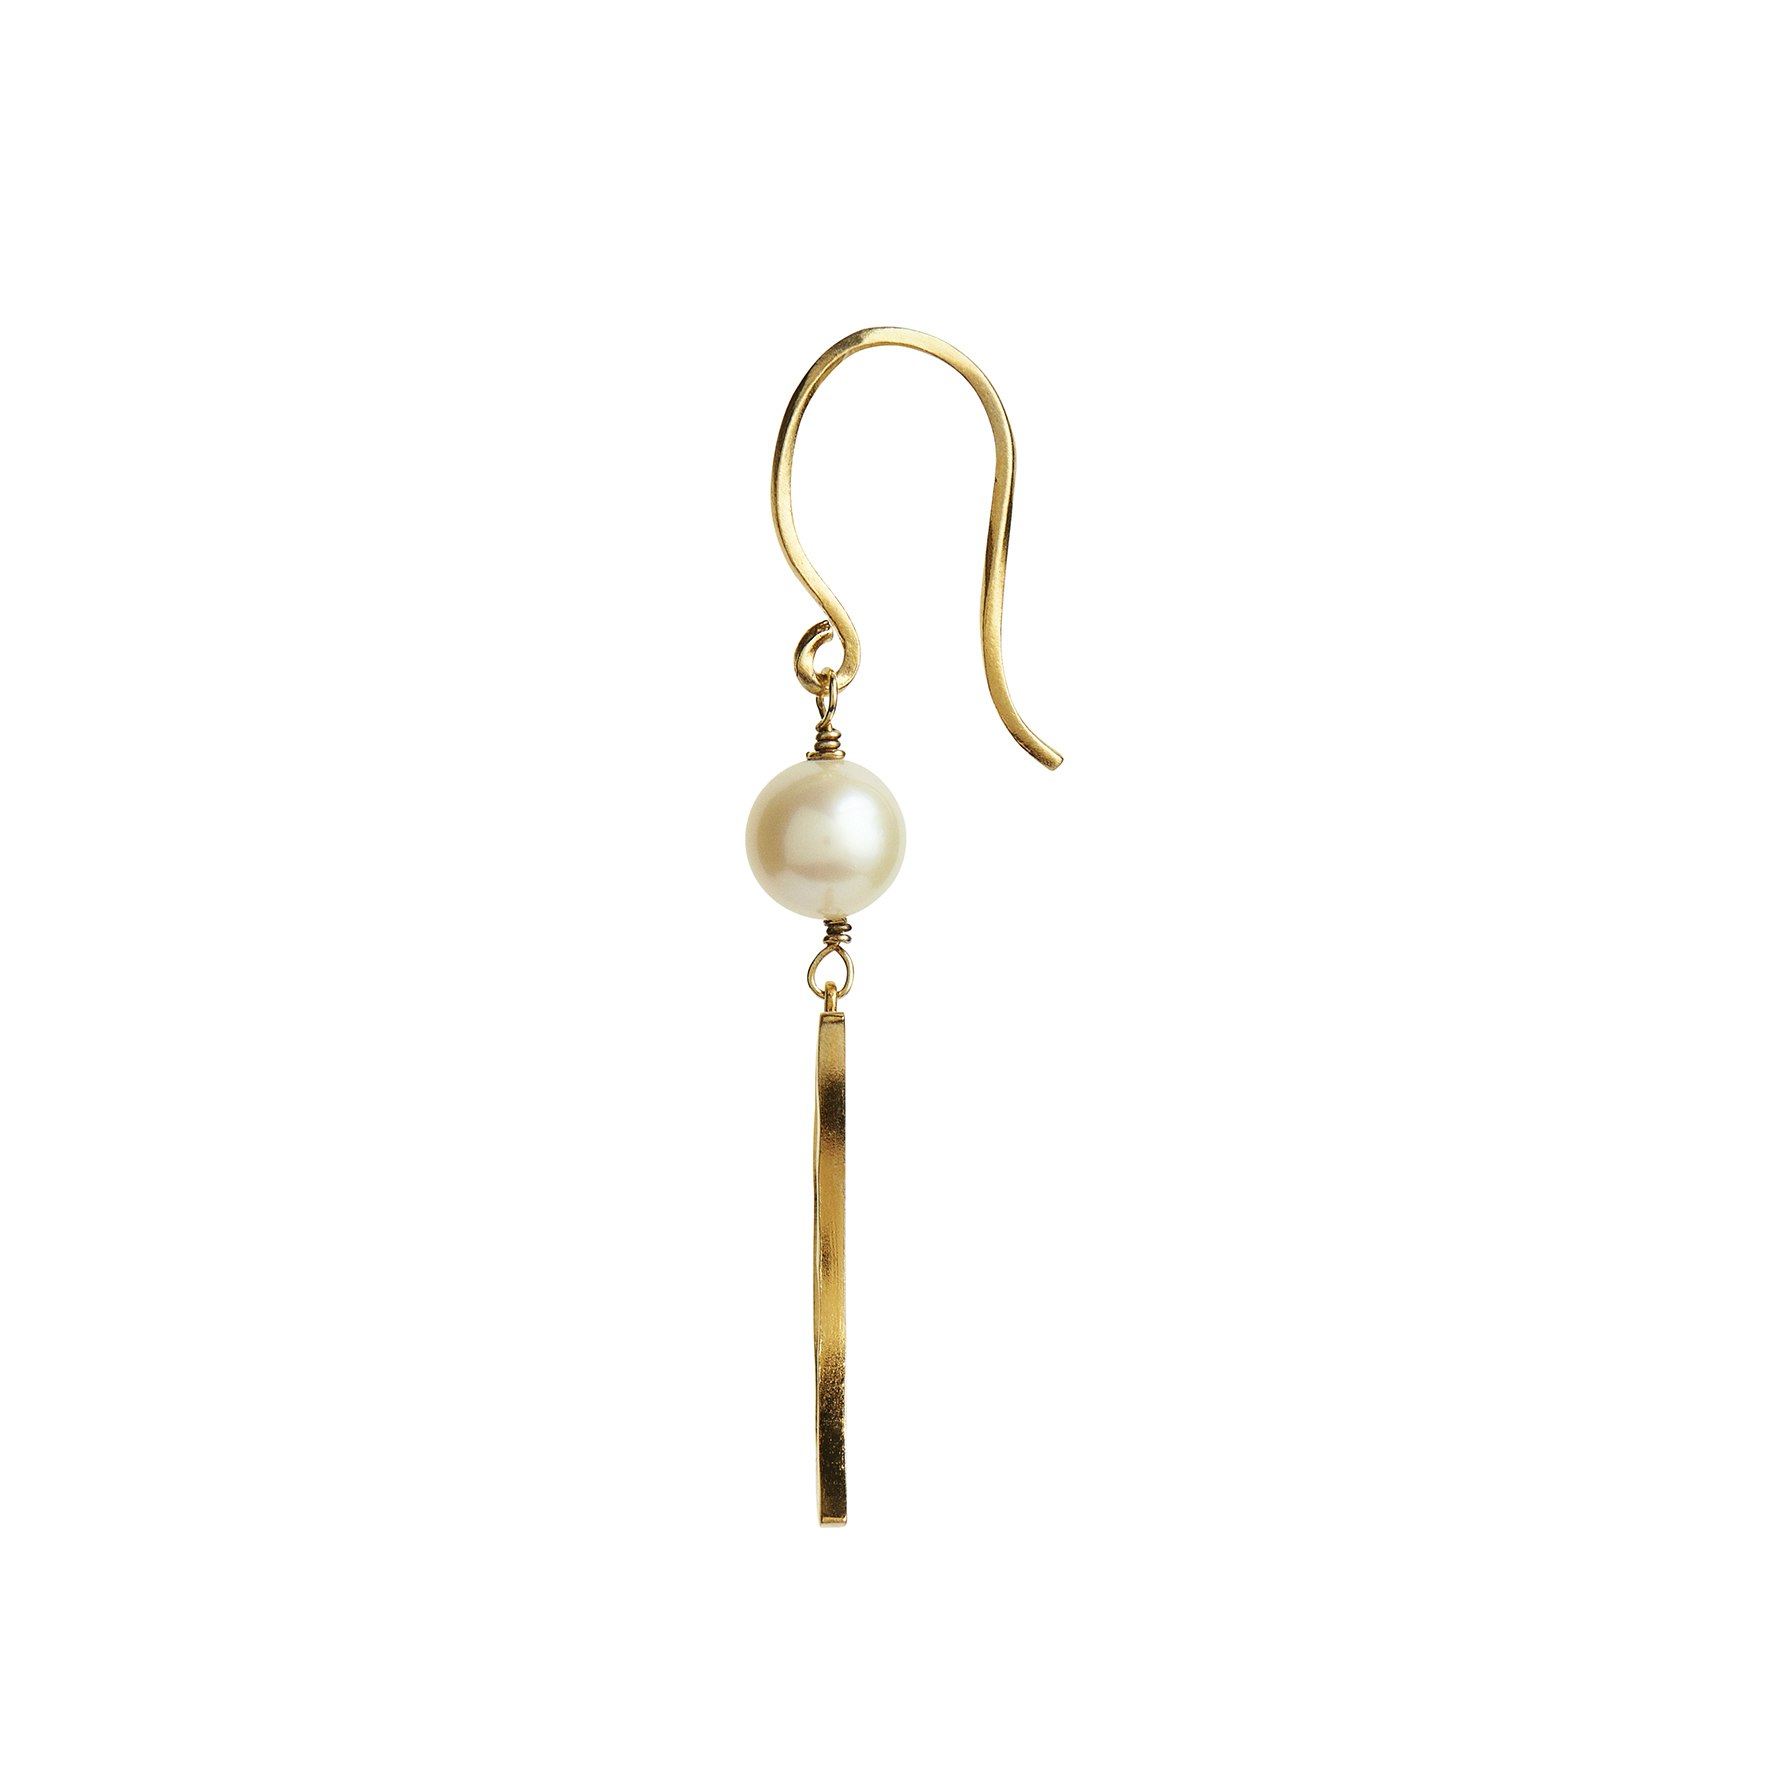 Bella Moon Earring With Pearl fra STINE A Jewelry i Forgyldt-Sølv Sterling 925